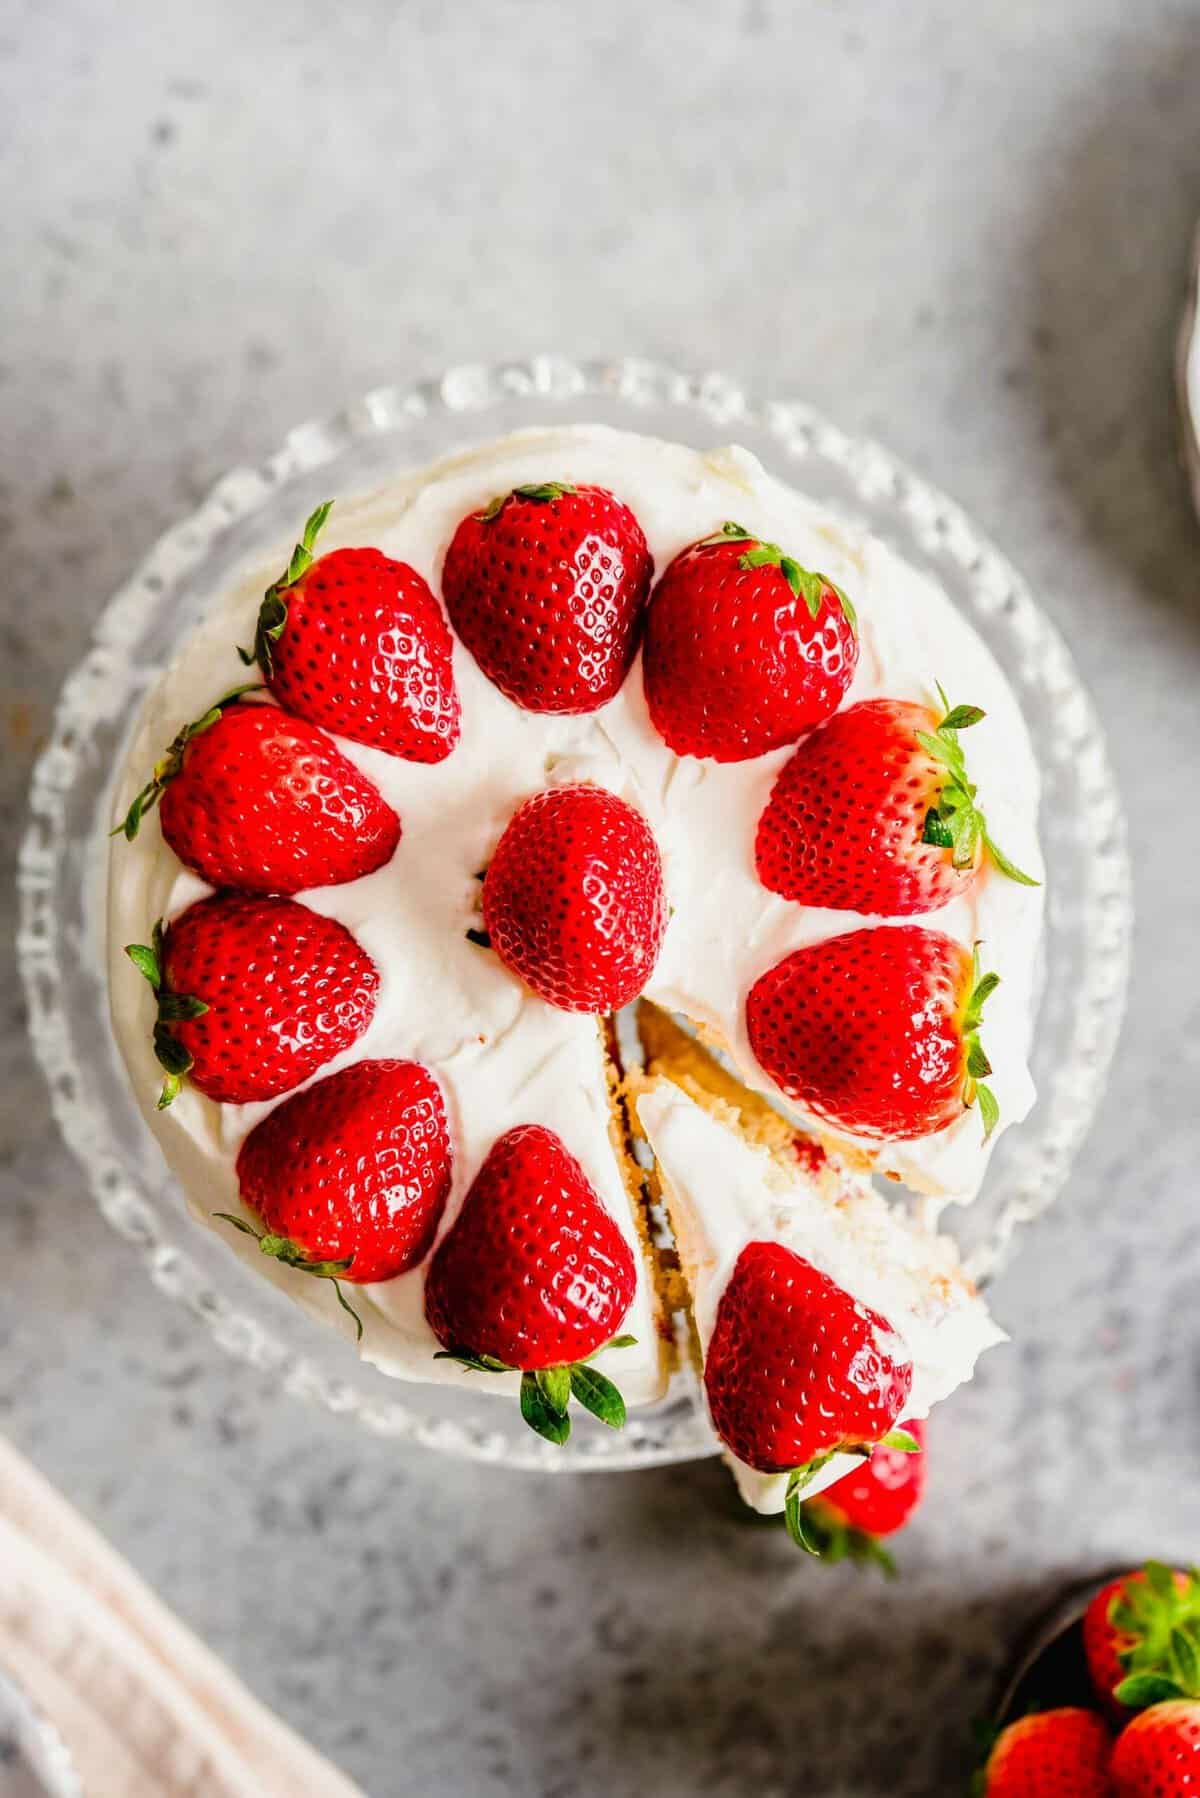 Overhead view of strawberry sponge cake, decorated with strawberries and one slice being removed